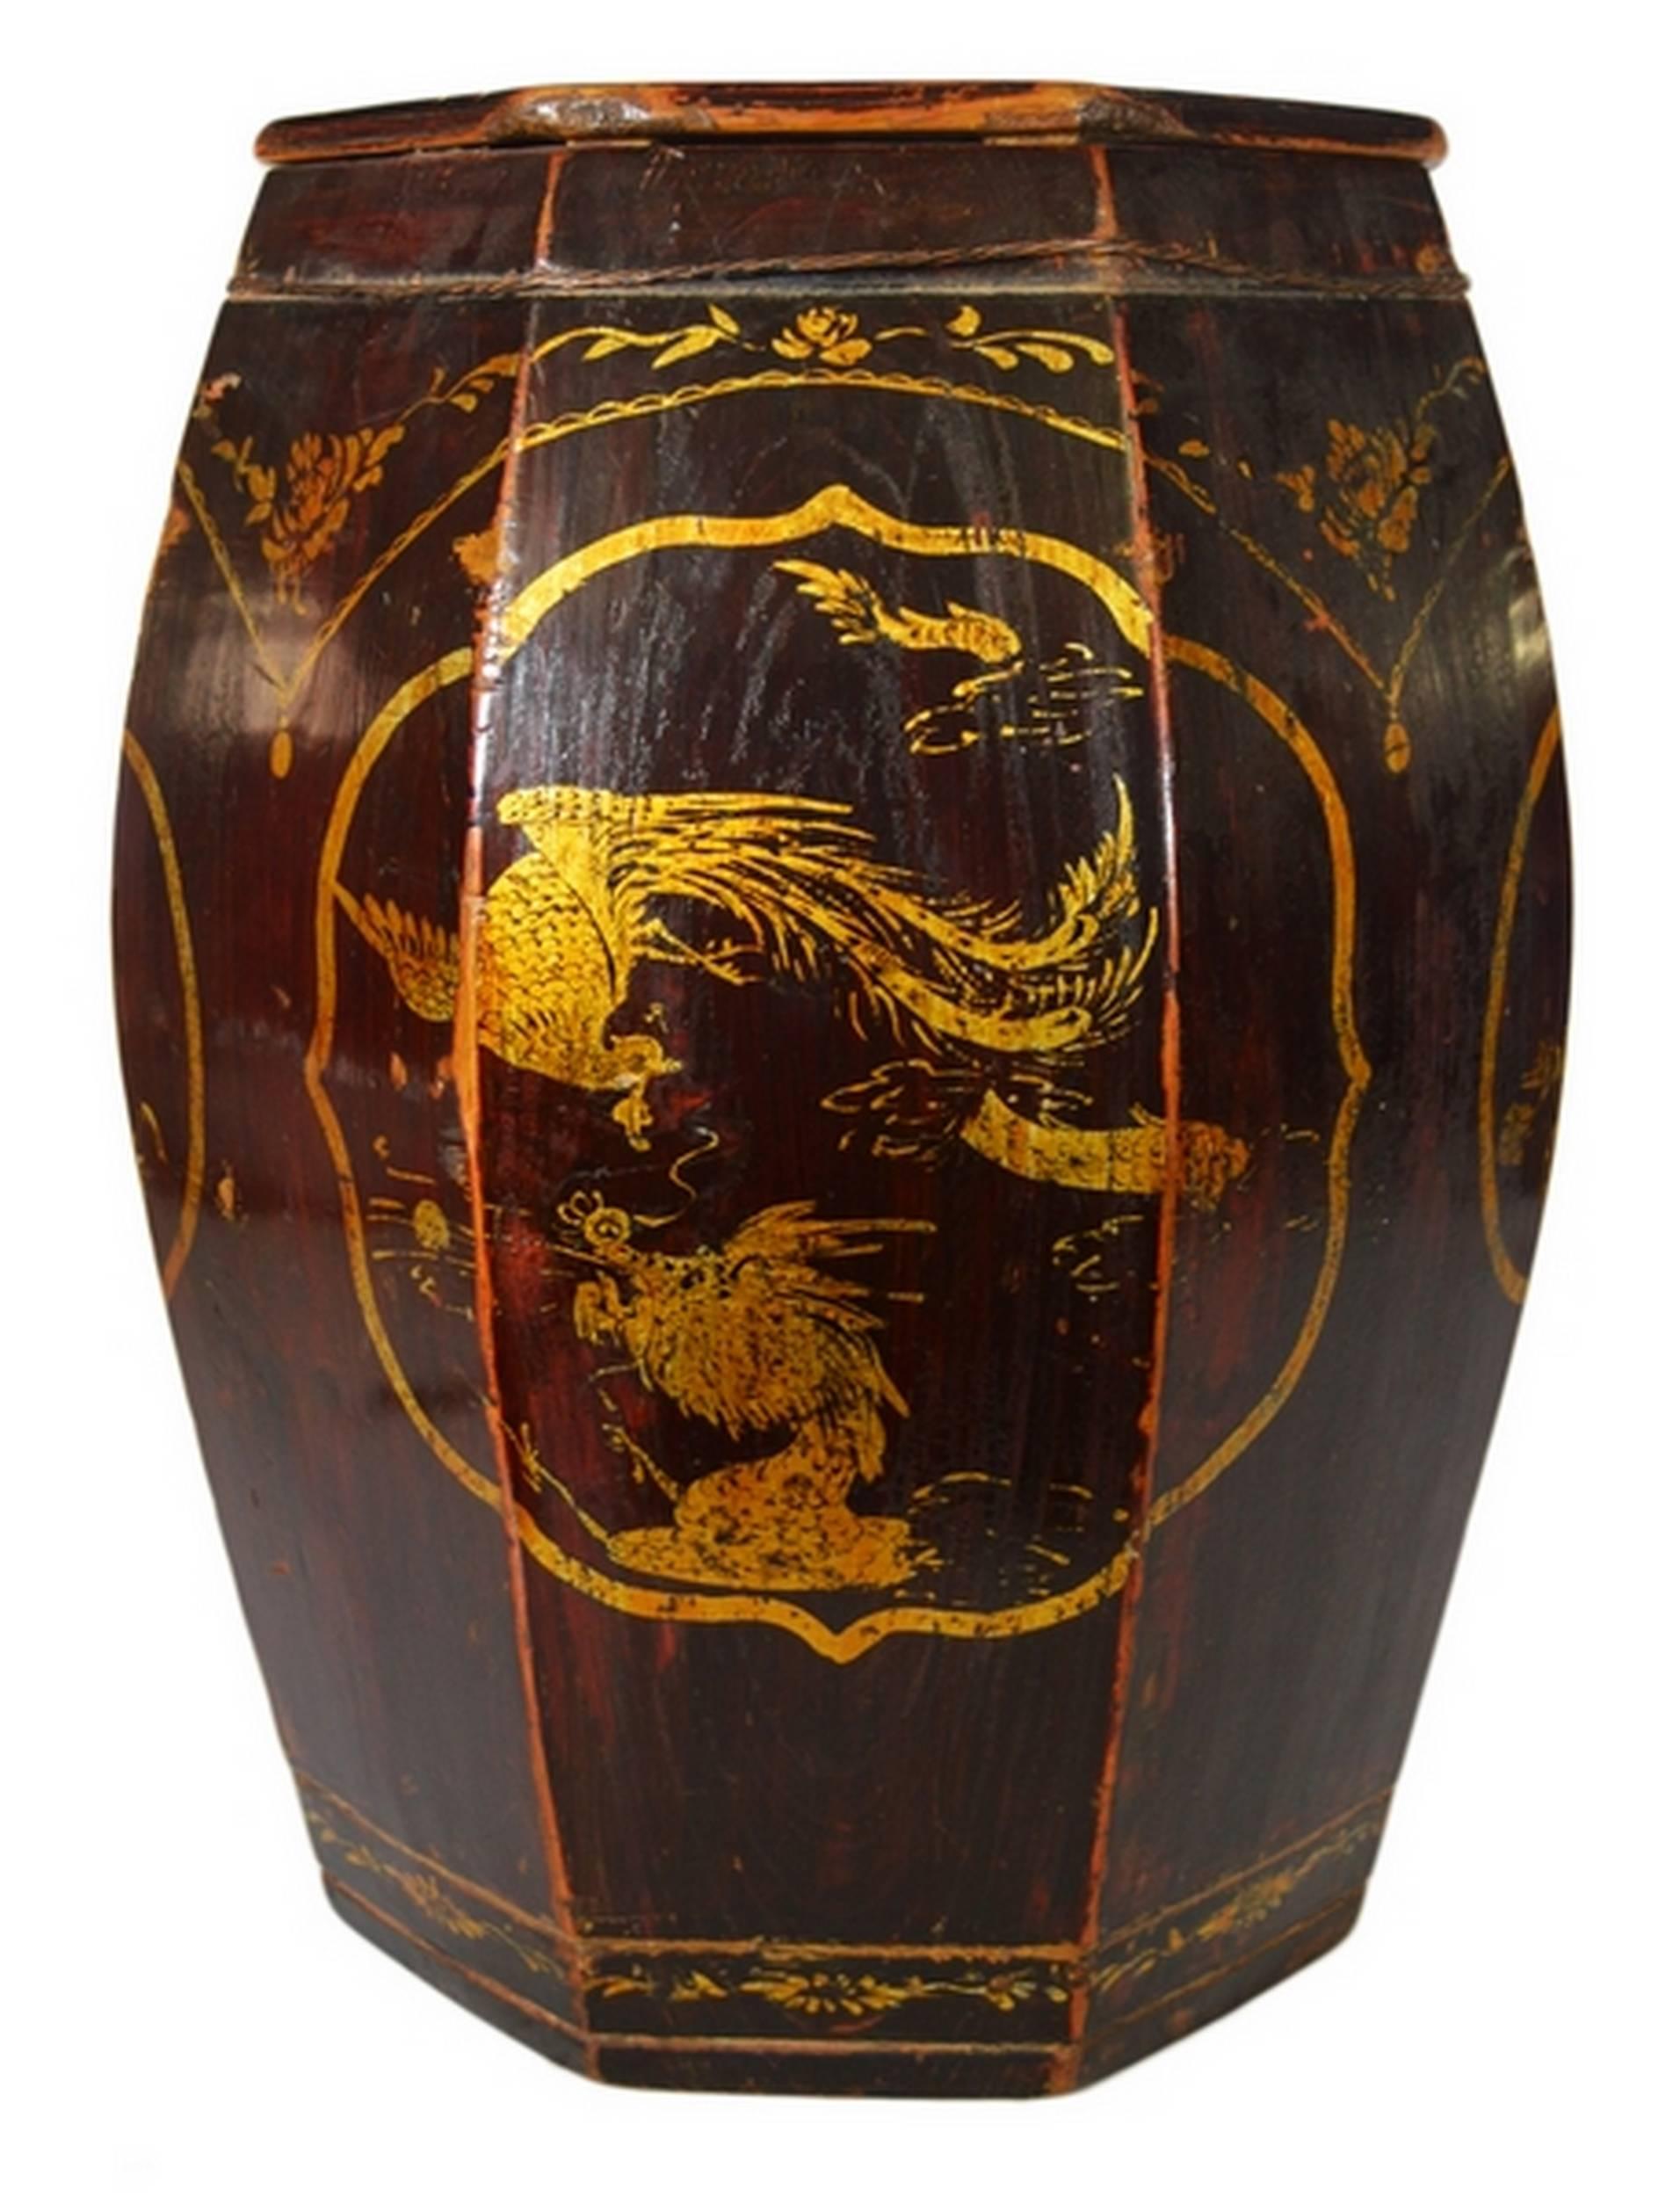 A 19th century grain storage barrel with medallions, hand-painted in, China. This octagonal barrel was made with dark varnished wood and features a belly adorned with three gilt, hand-painted lobed medallions. Two medallions depict a flower and bird